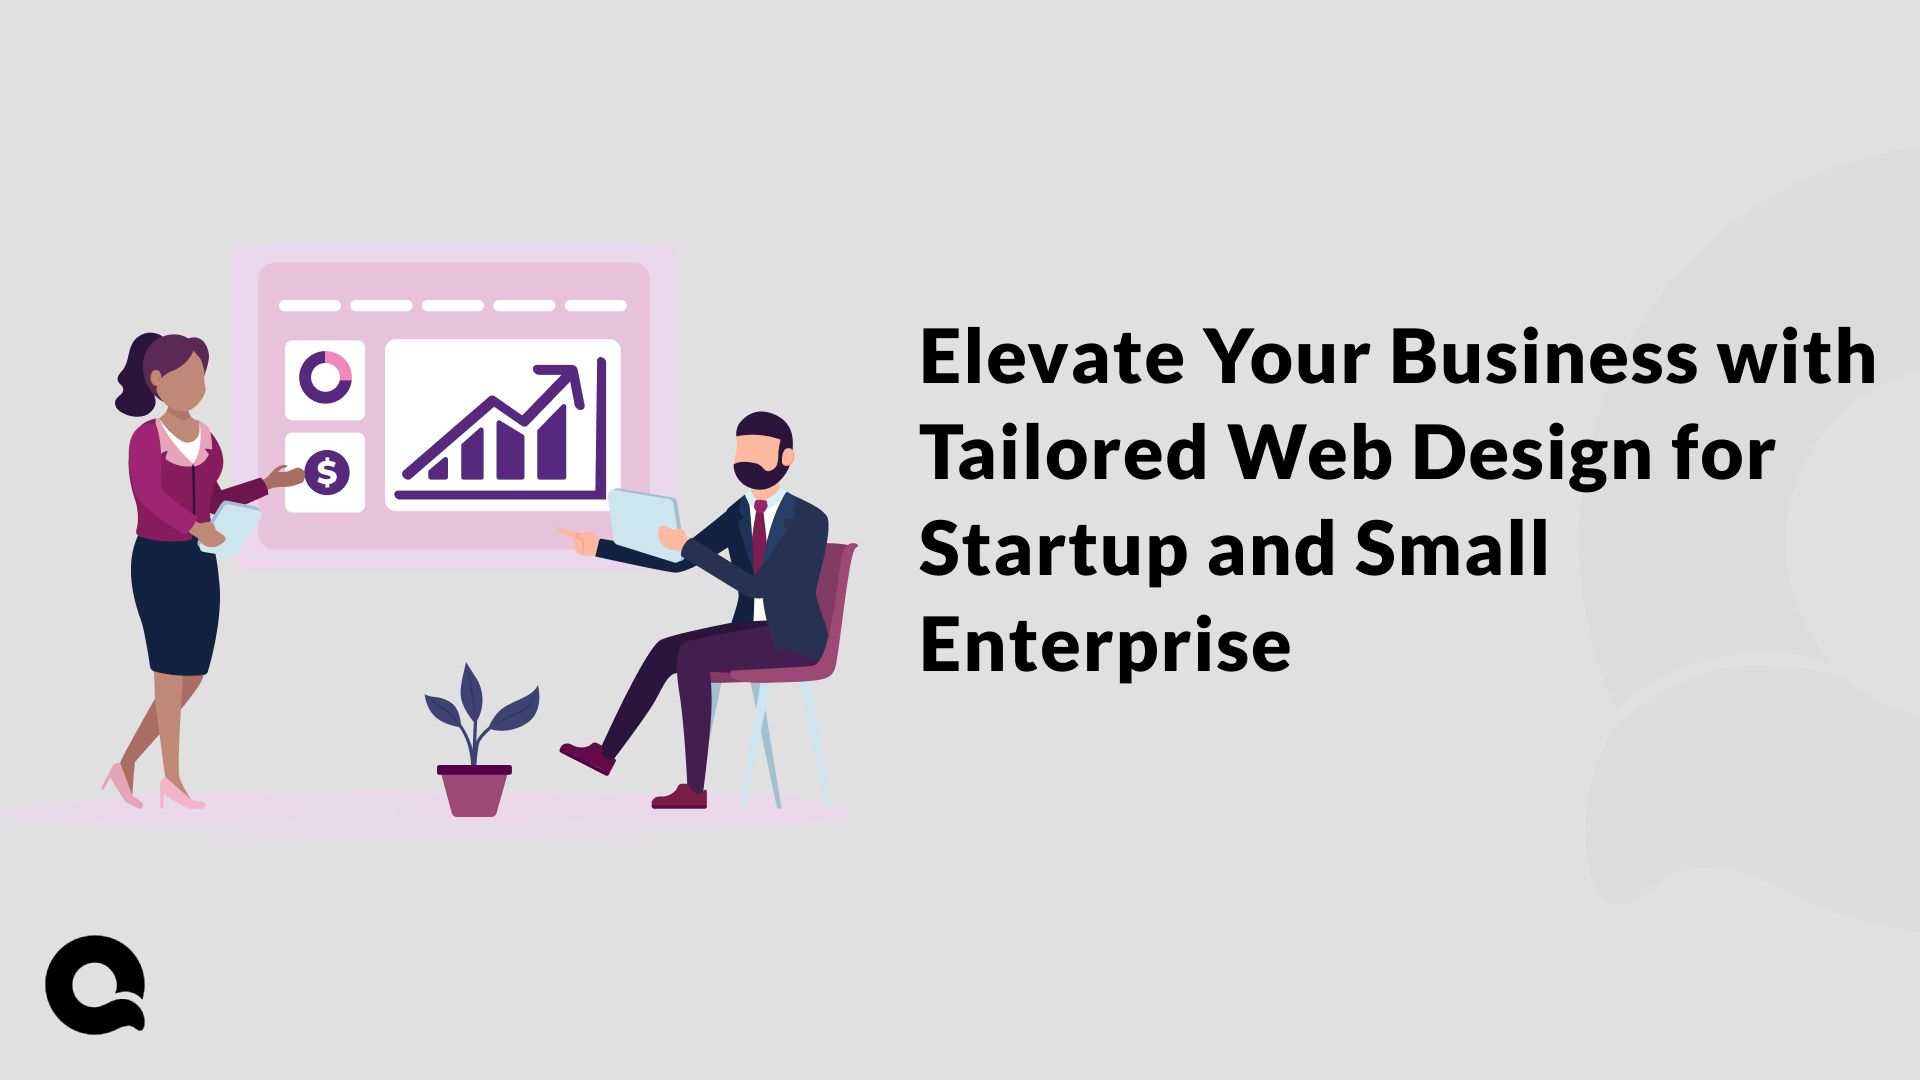 Elevate Your Business with Tailored Web Design for Startup and Small Enterprise